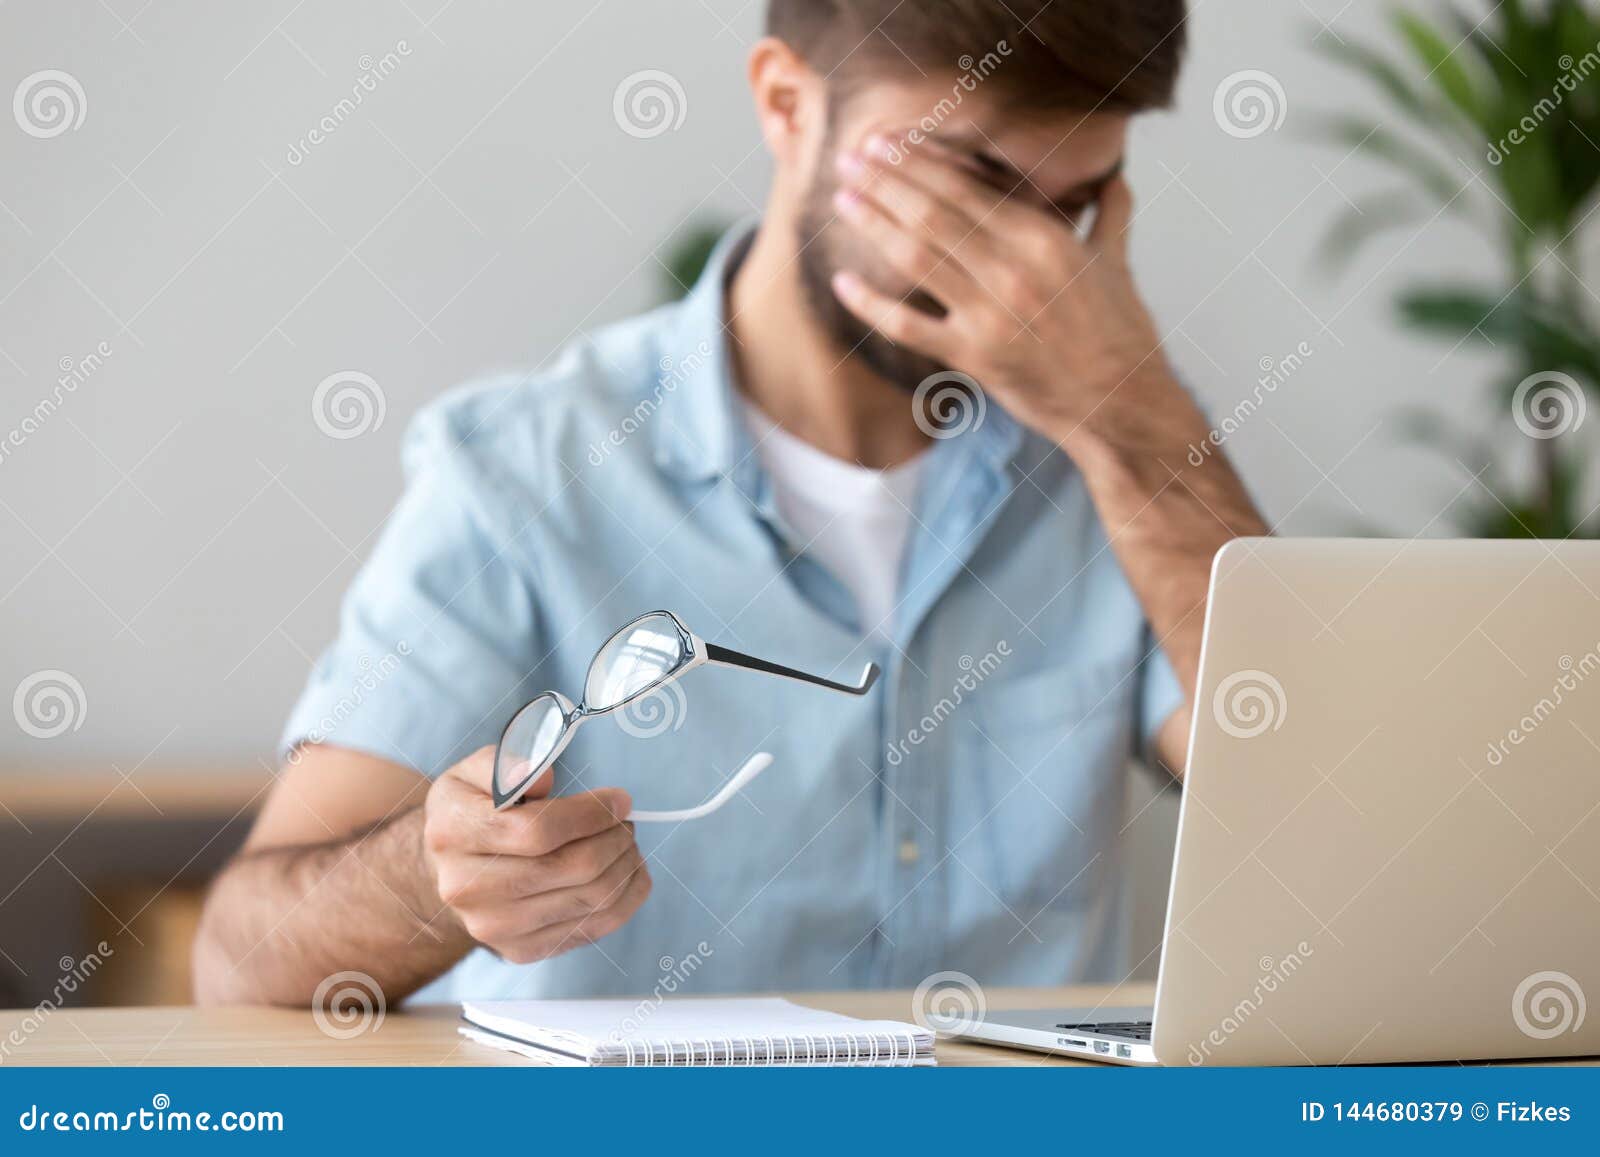 man suffering from dry eyes syndrome after long computer work